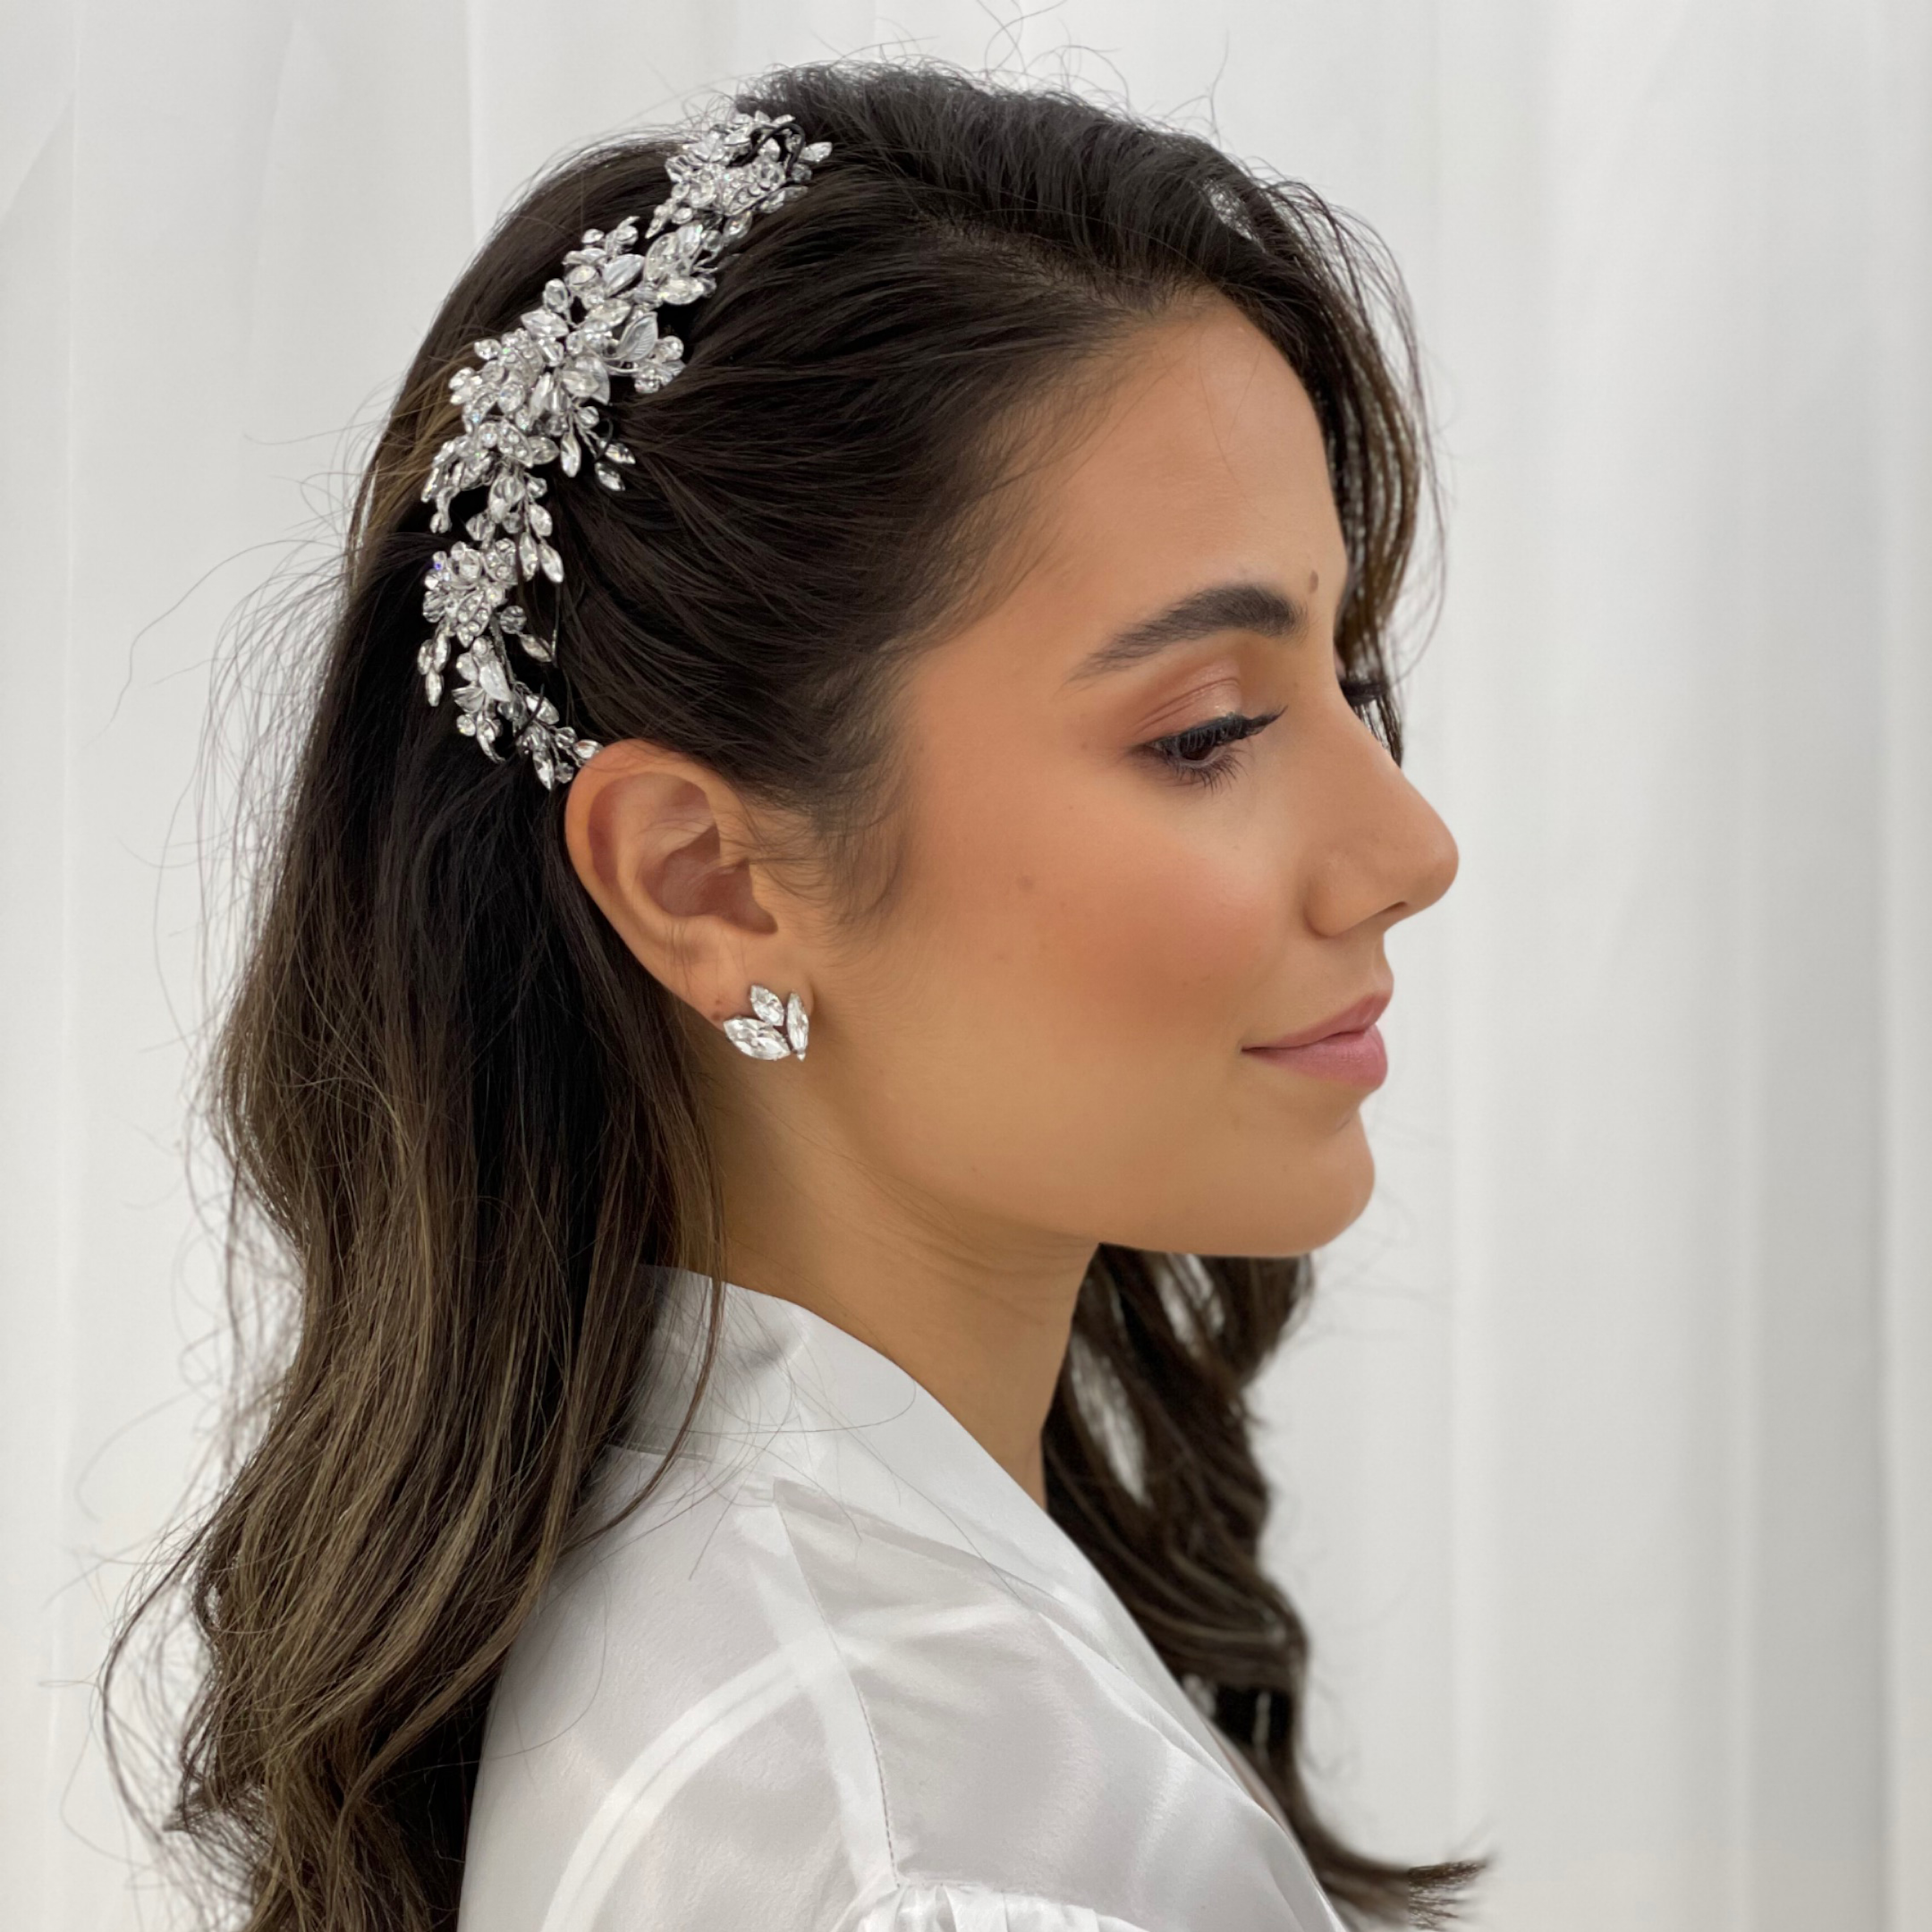 A range of statement earrings to add a touch of glamour to your bridal look